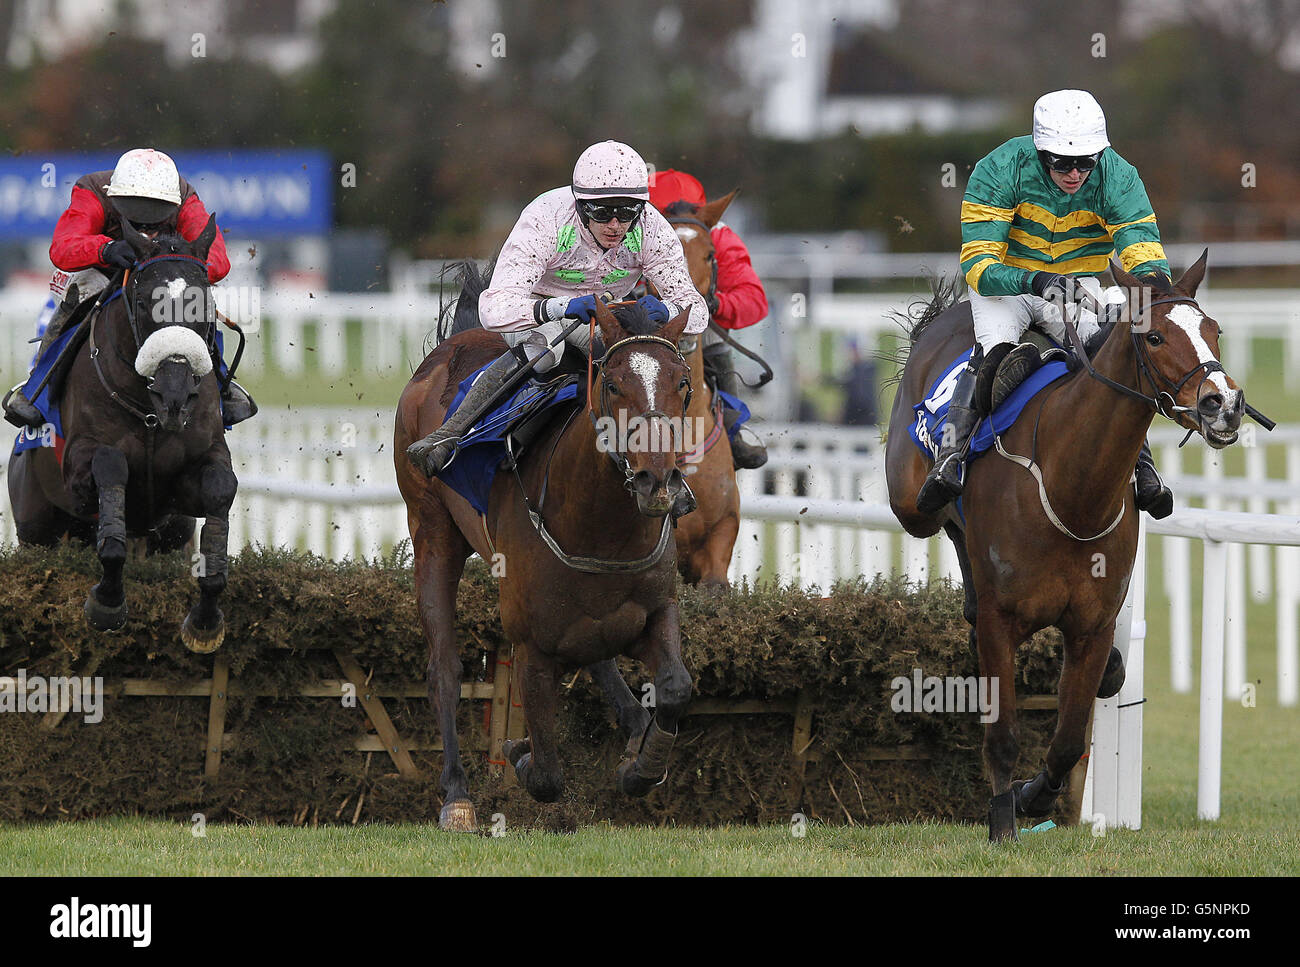 Blood Cotil under jockey Paul Townend (centre) races to win the Q8 Oils Juvenile Hurdle ahead of Stocktons Wing under jockey Mark Walsh during the Leopardstown Christmas Festival at Leopardstown Racecourse, Dublin, Ireland. Stock Photo